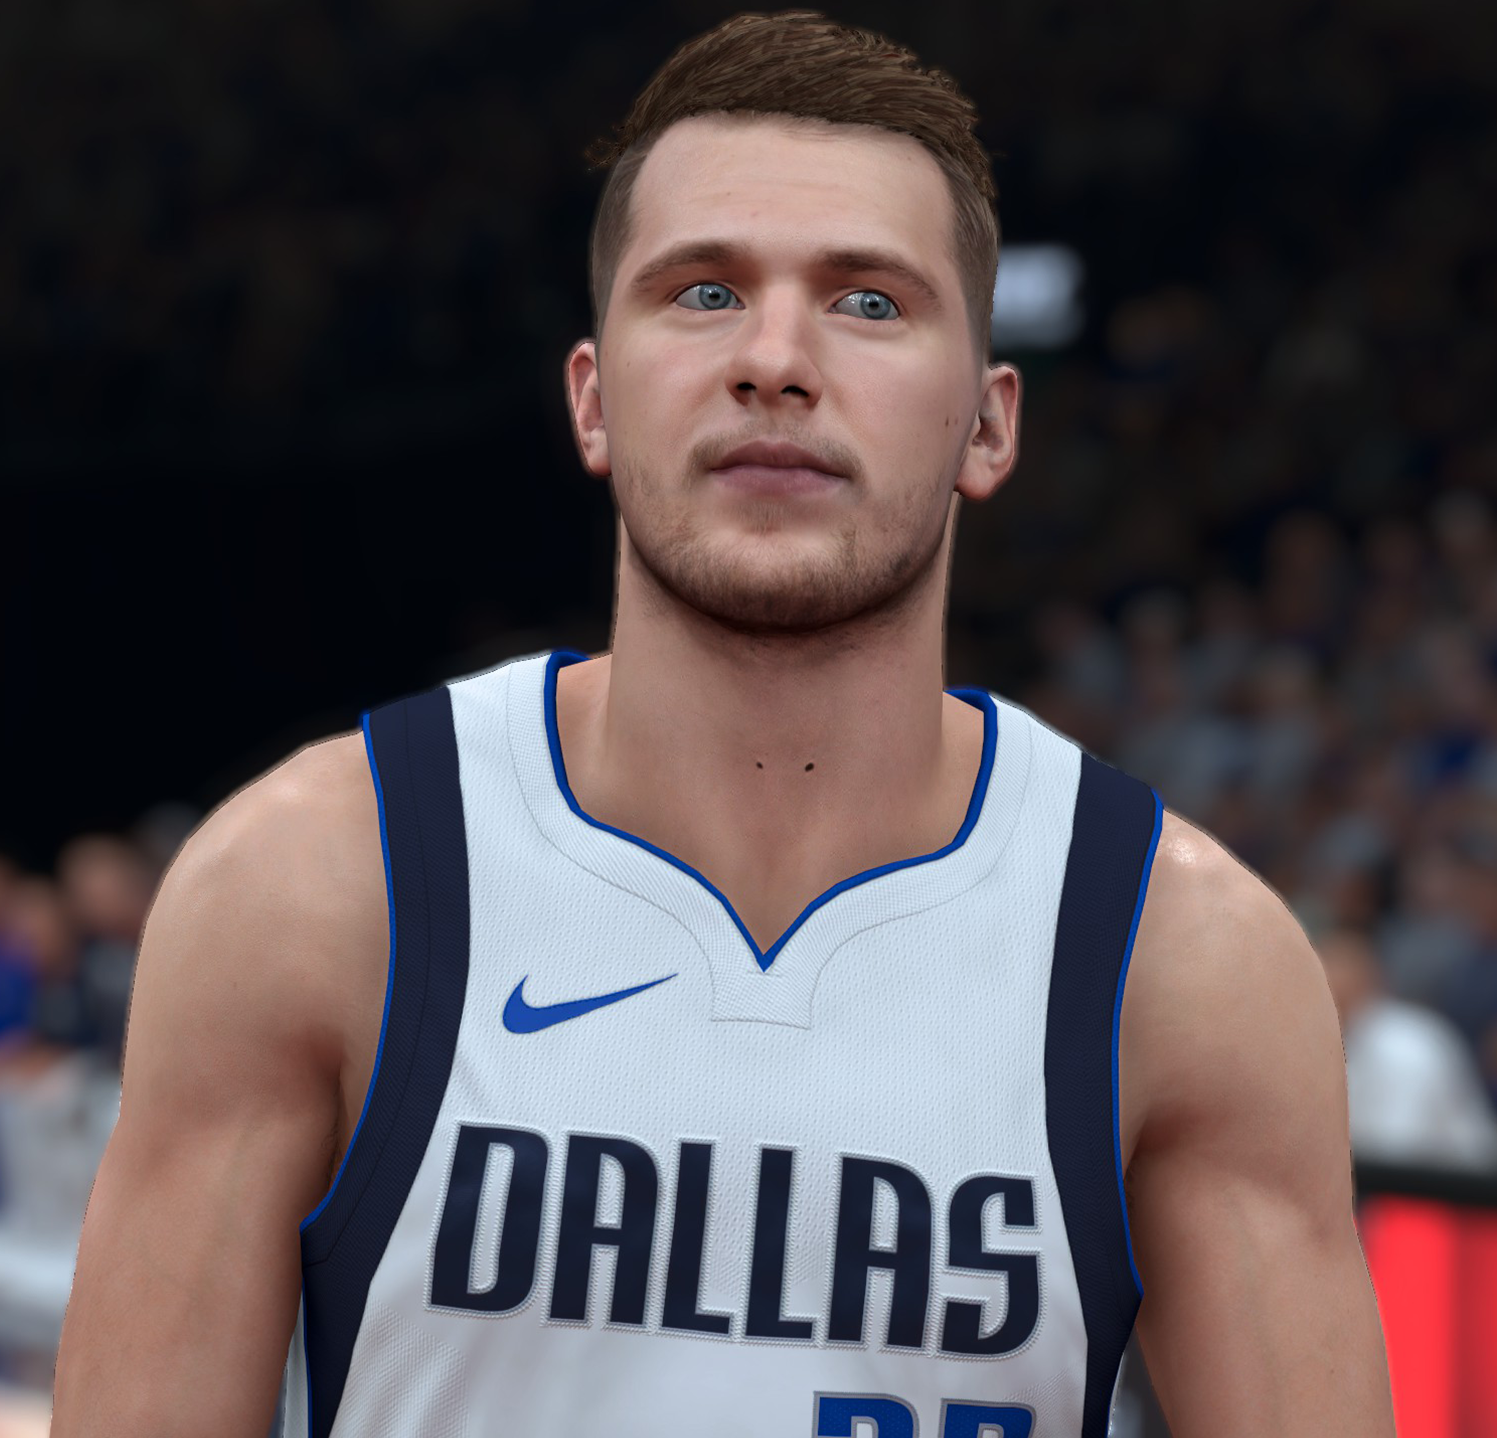 Doncic